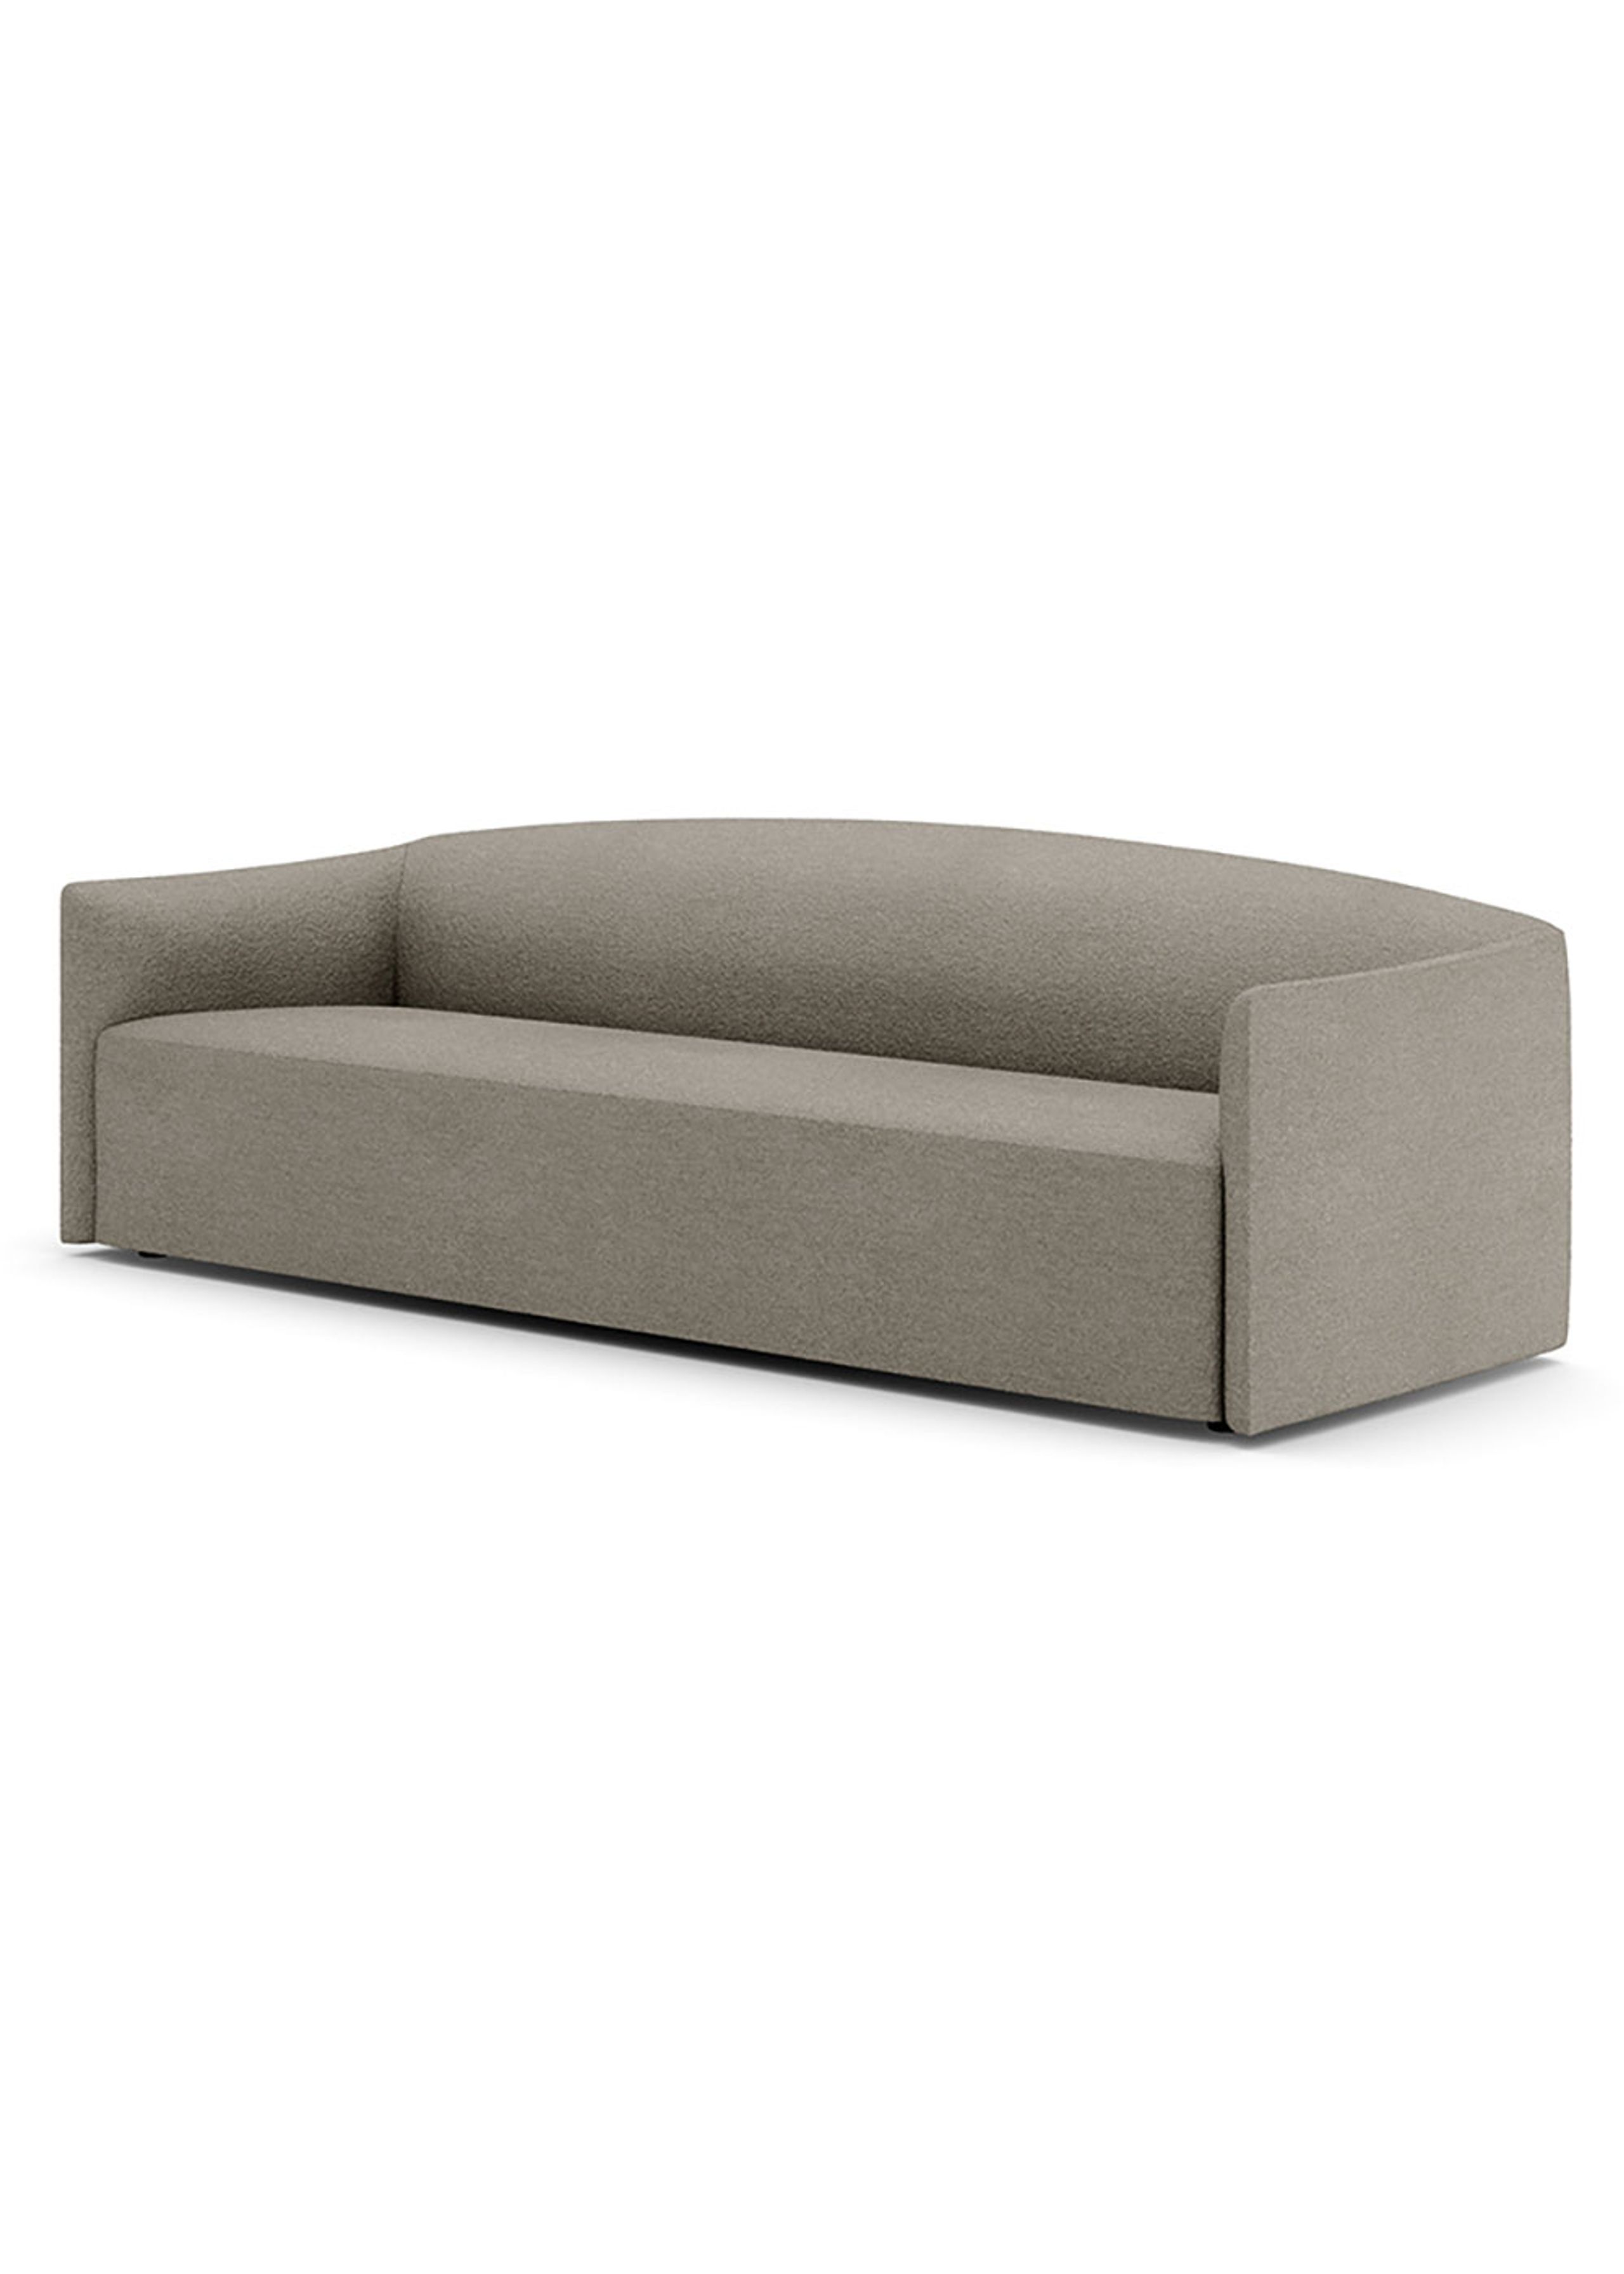 New Works - 3-Personen-Sofa - Shore Sofa 3 Seater Extended Base - Marlon Taupe